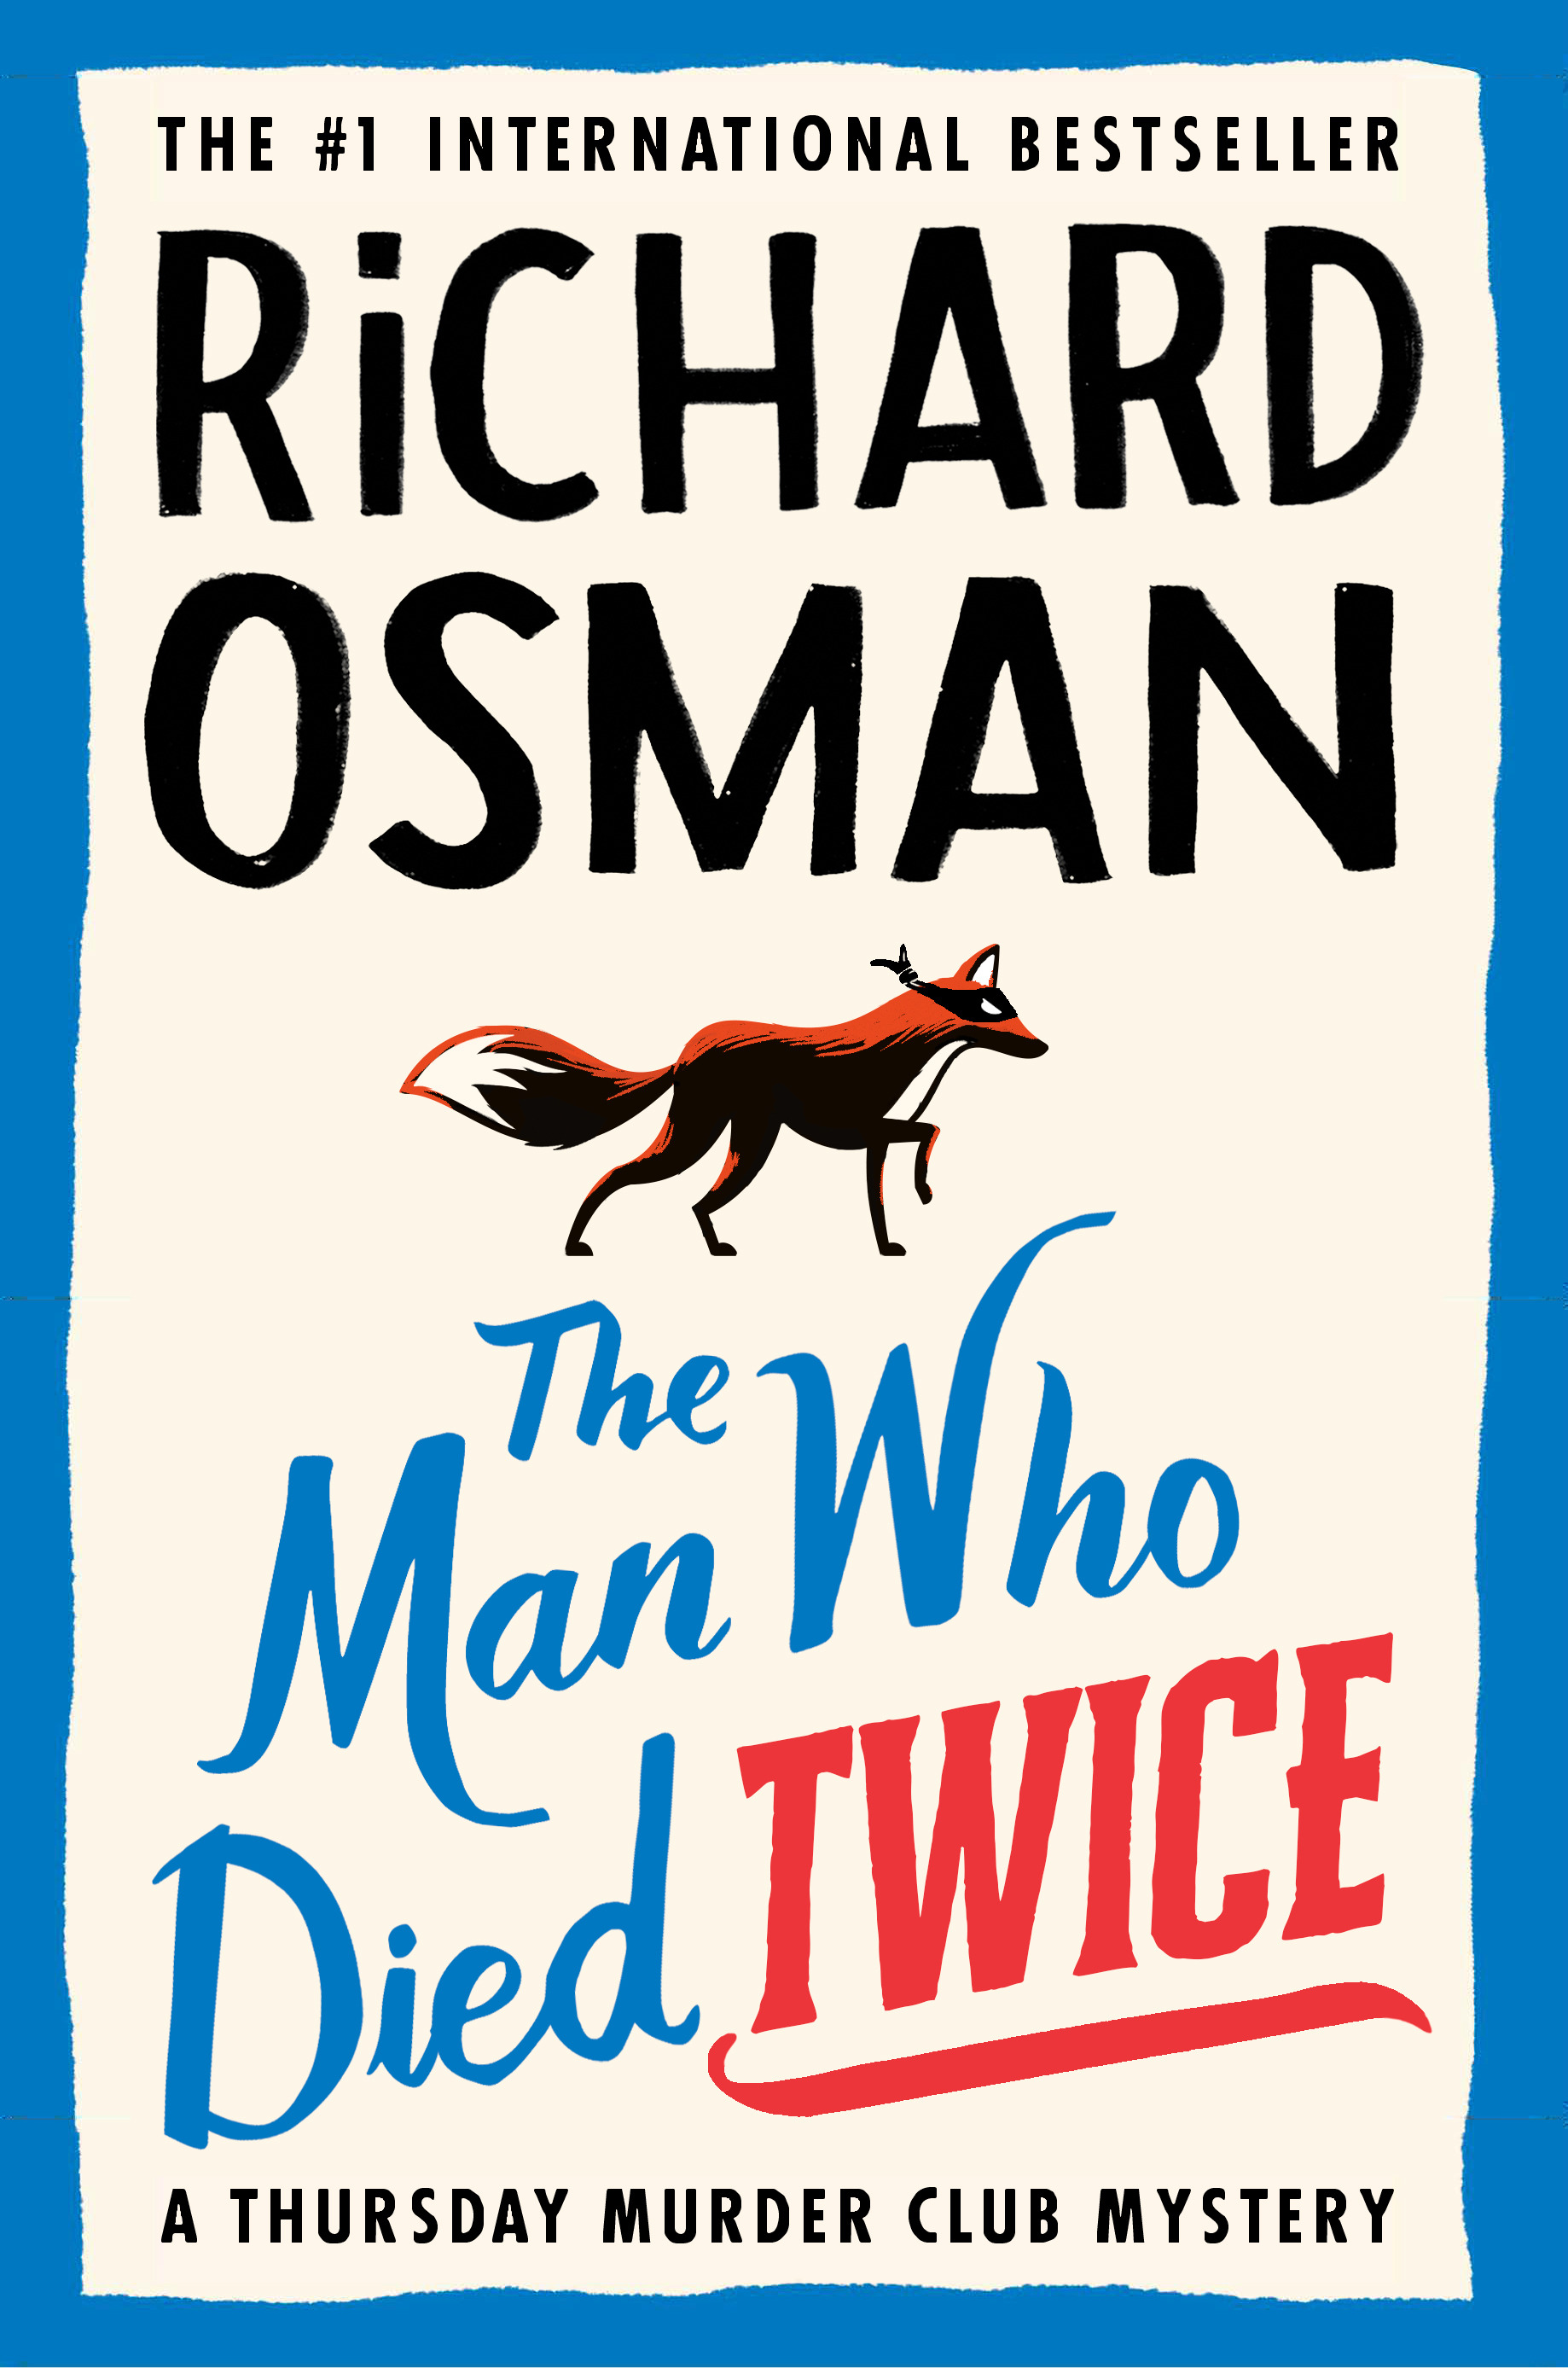 Virtual event with Richard Osman/The Man Who Died Twice